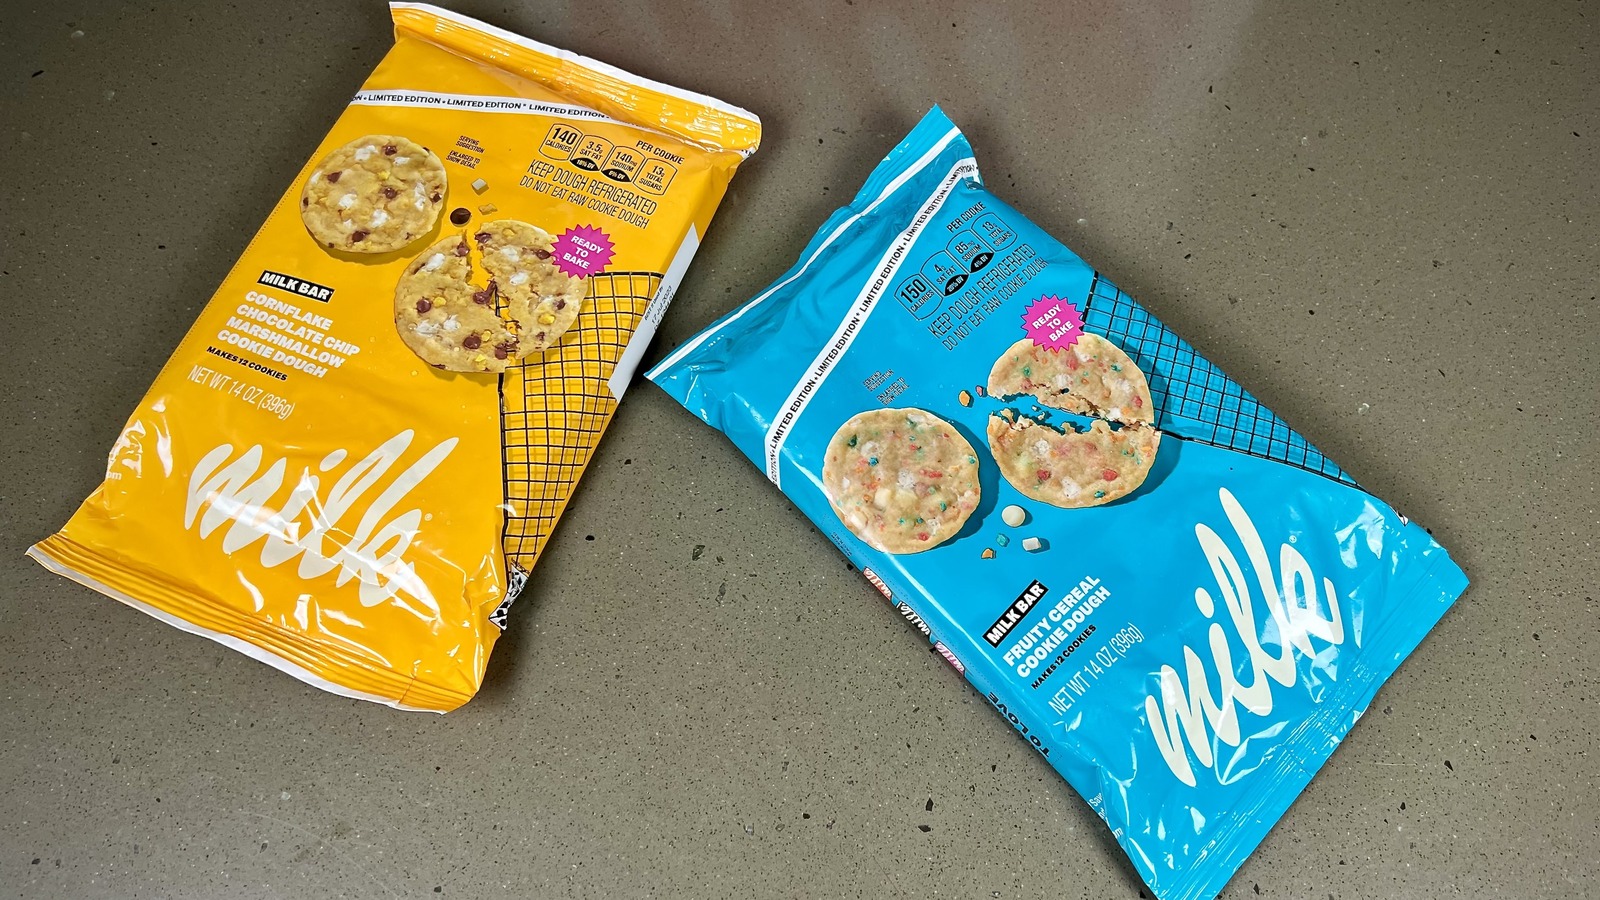 Review: Milk Bar's Ready-To-Bake Cookie Dough Blew Us Away